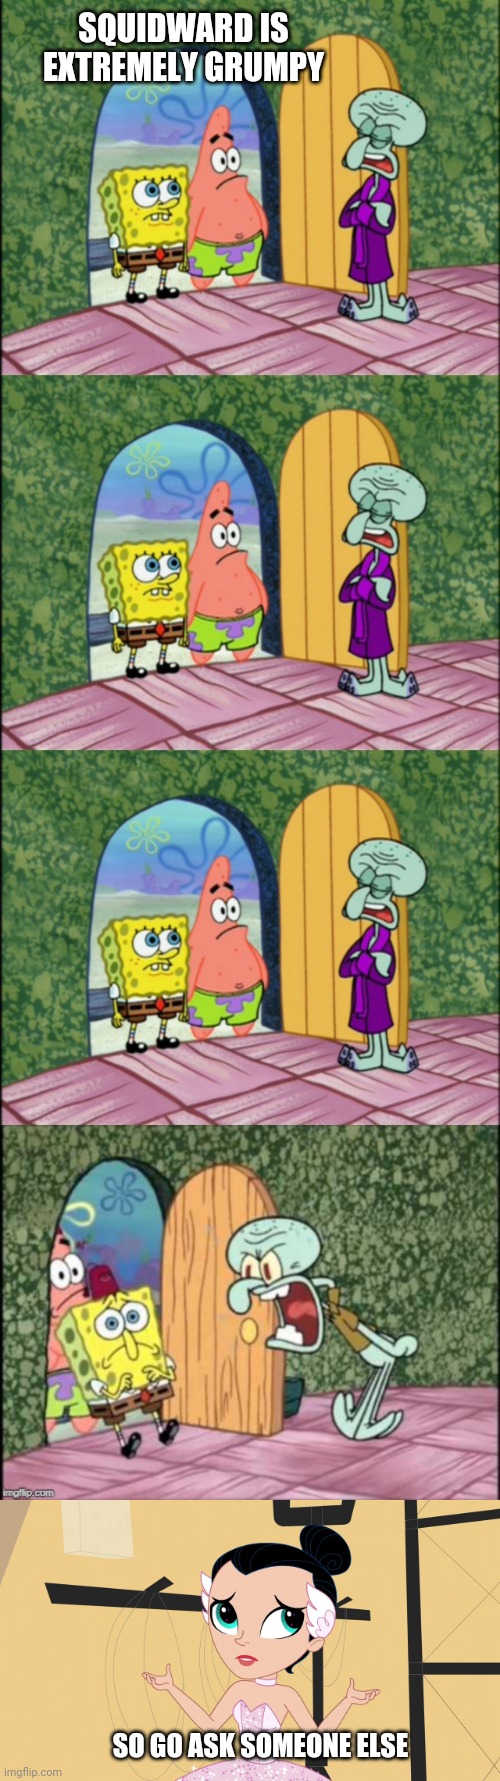 SQUIDWARD IS EXTREMELY GRUMPY; SO GO ASK SOMEONE ELSE | image tagged in spongebob squidward and patrick bad pun,ballet,ballerina,cartoon,girl,pretty girl | made w/ Imgflip meme maker